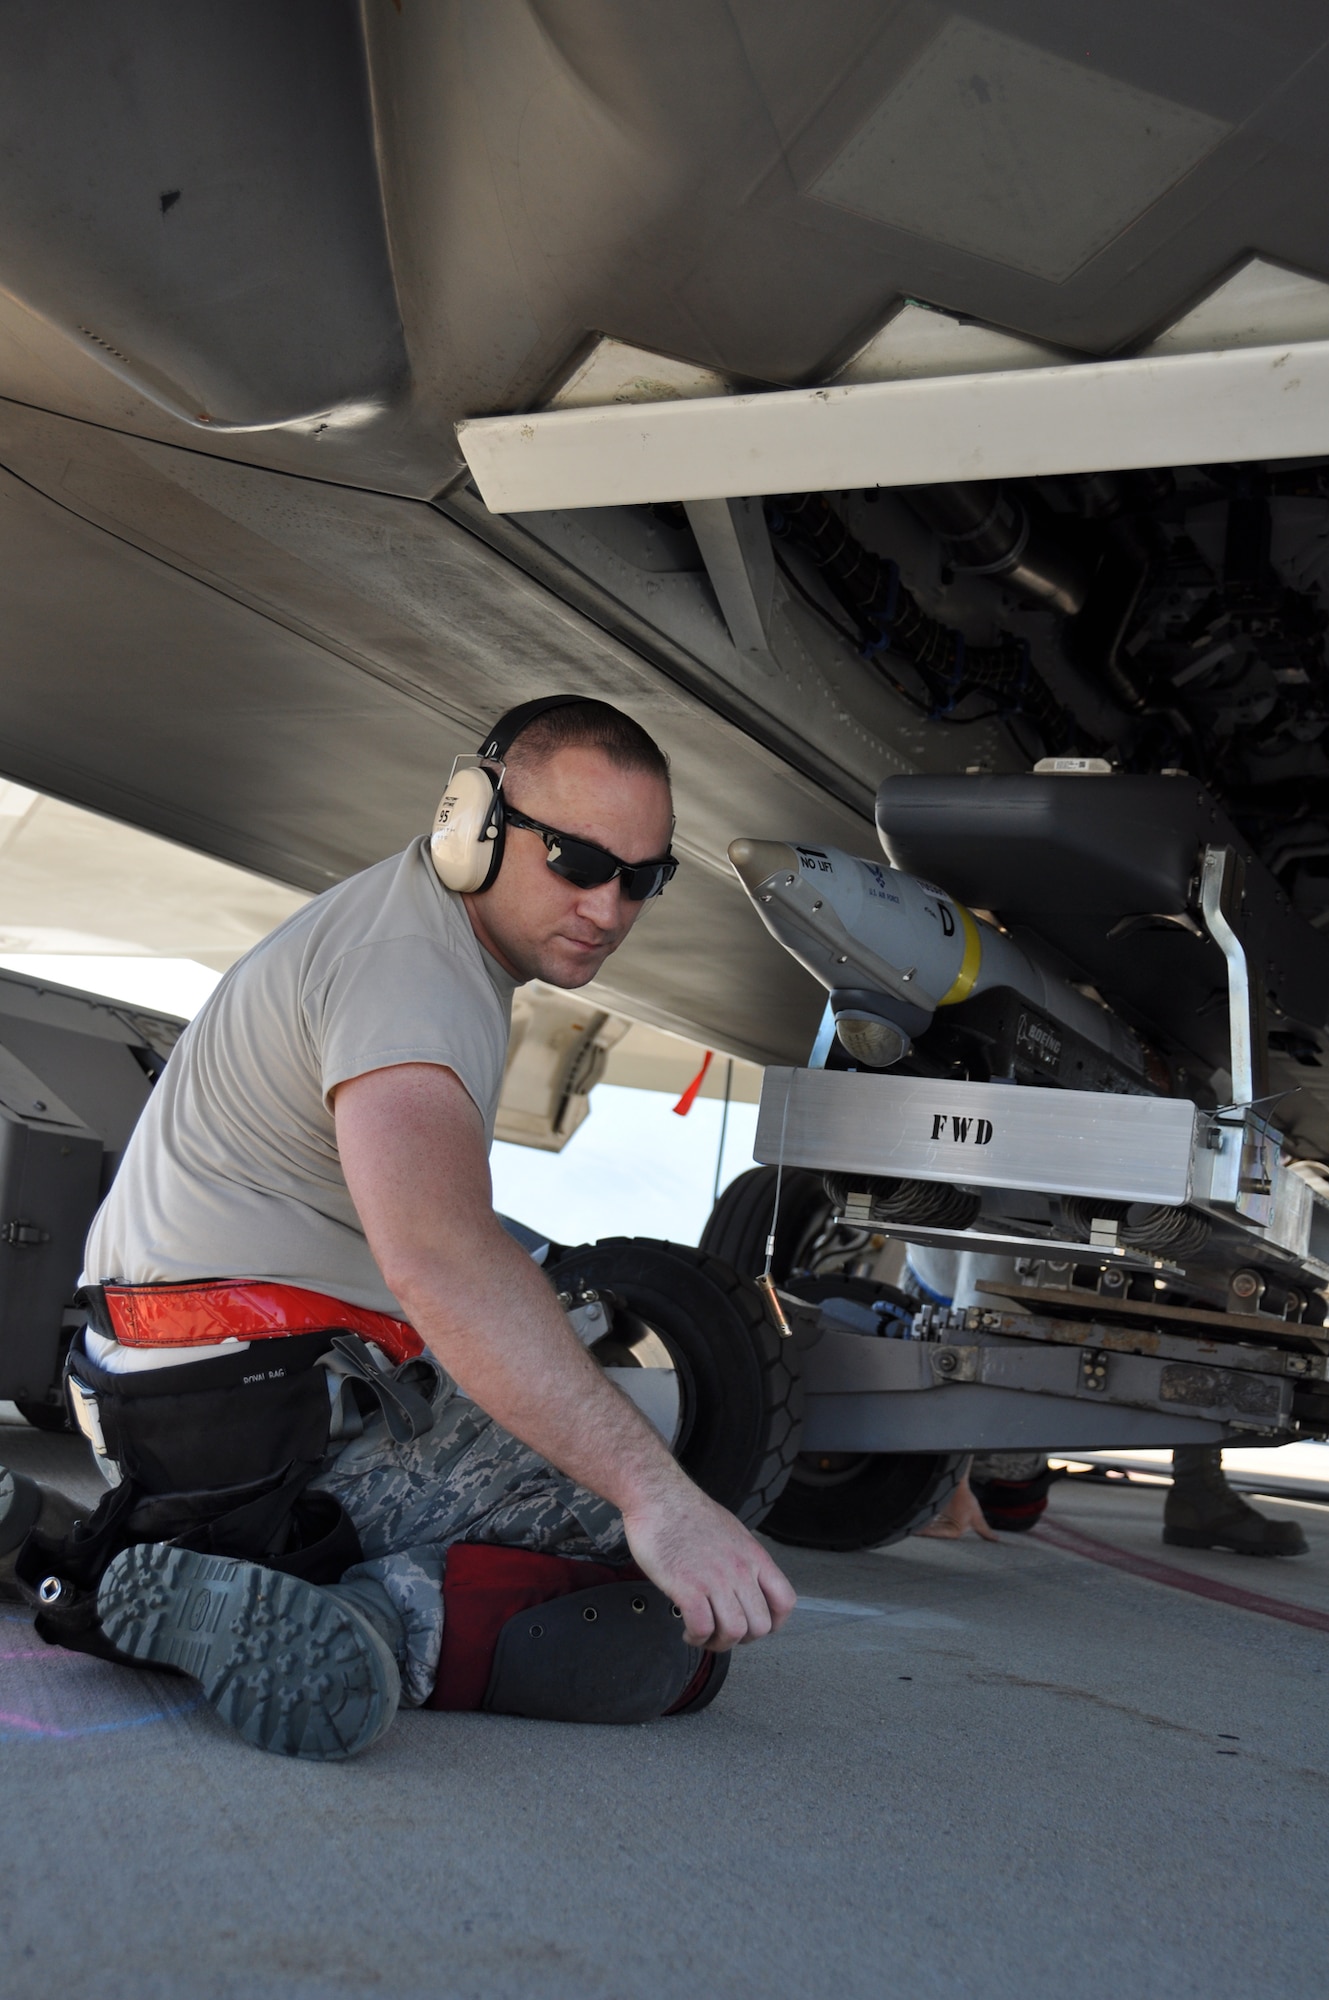 Staff Sgt. Brandon Vice, 477th Aircraft Maintenance Squadron weapons load crew member, guides a GBU-39 small diameter bomb into the main weapons bay of an F-22 during Combat Hammer. Combat Hammer is a weapons system evaluation program sponsored by the 86th Fighter Weapons Squadron, which provides an opportunity for an operational unit to employ them in a realistic tactical training environment.  (U.S. Air Force Photo/Tech. Sgt. Dana Rosso)